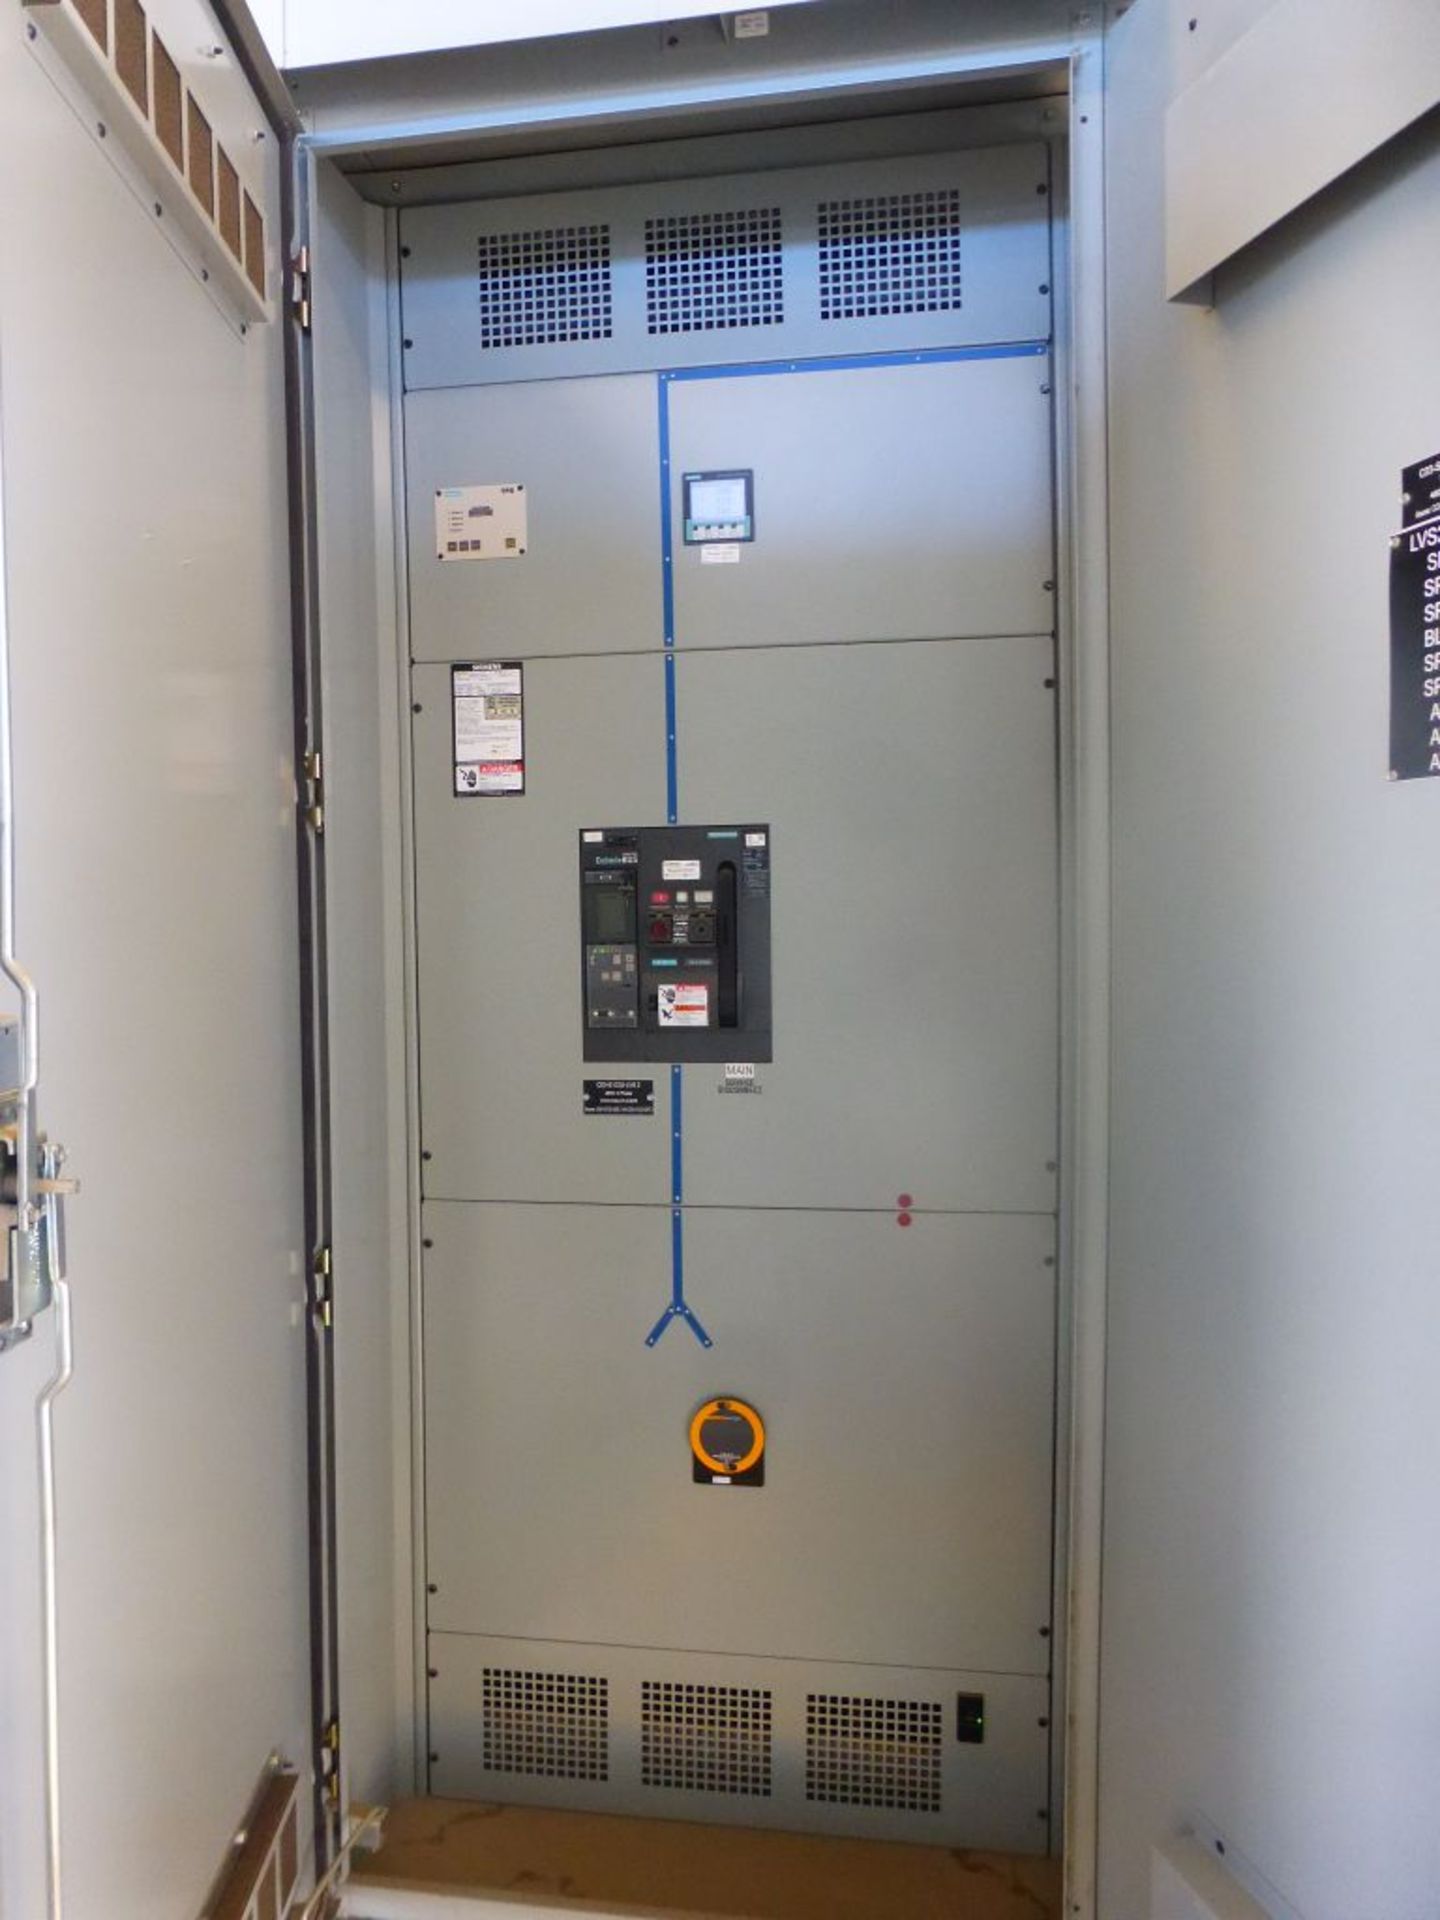 Siemens Switchgear - 4000A Breaker Suitable for Service Entrance | Lot Loading Fee: $500 | Main - Image 16 of 43